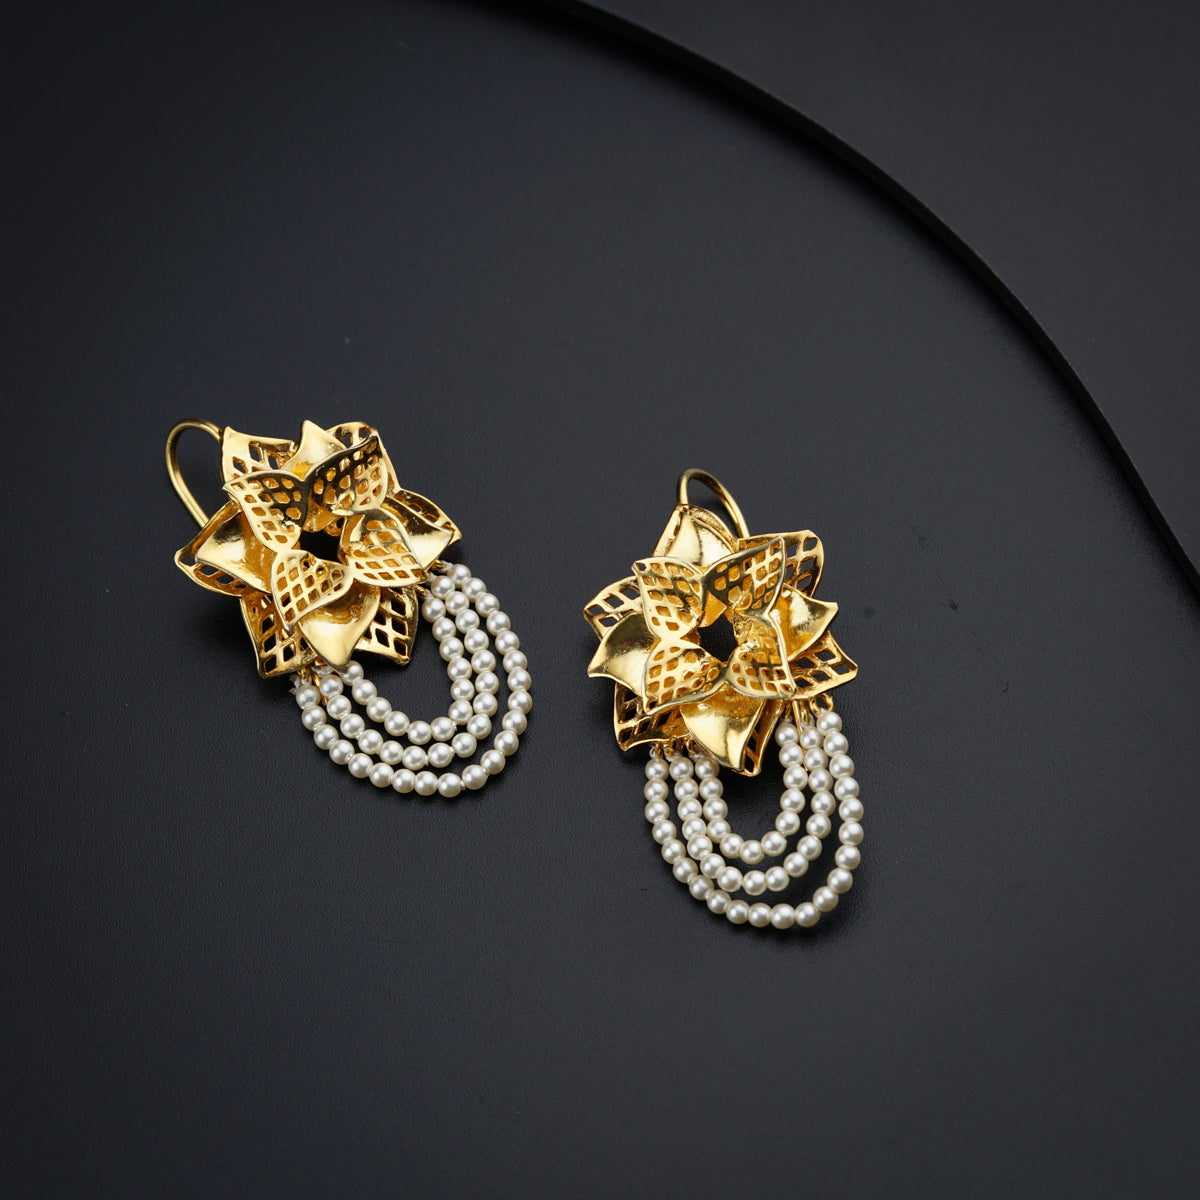 a pair of earrings with pearls on a black surface